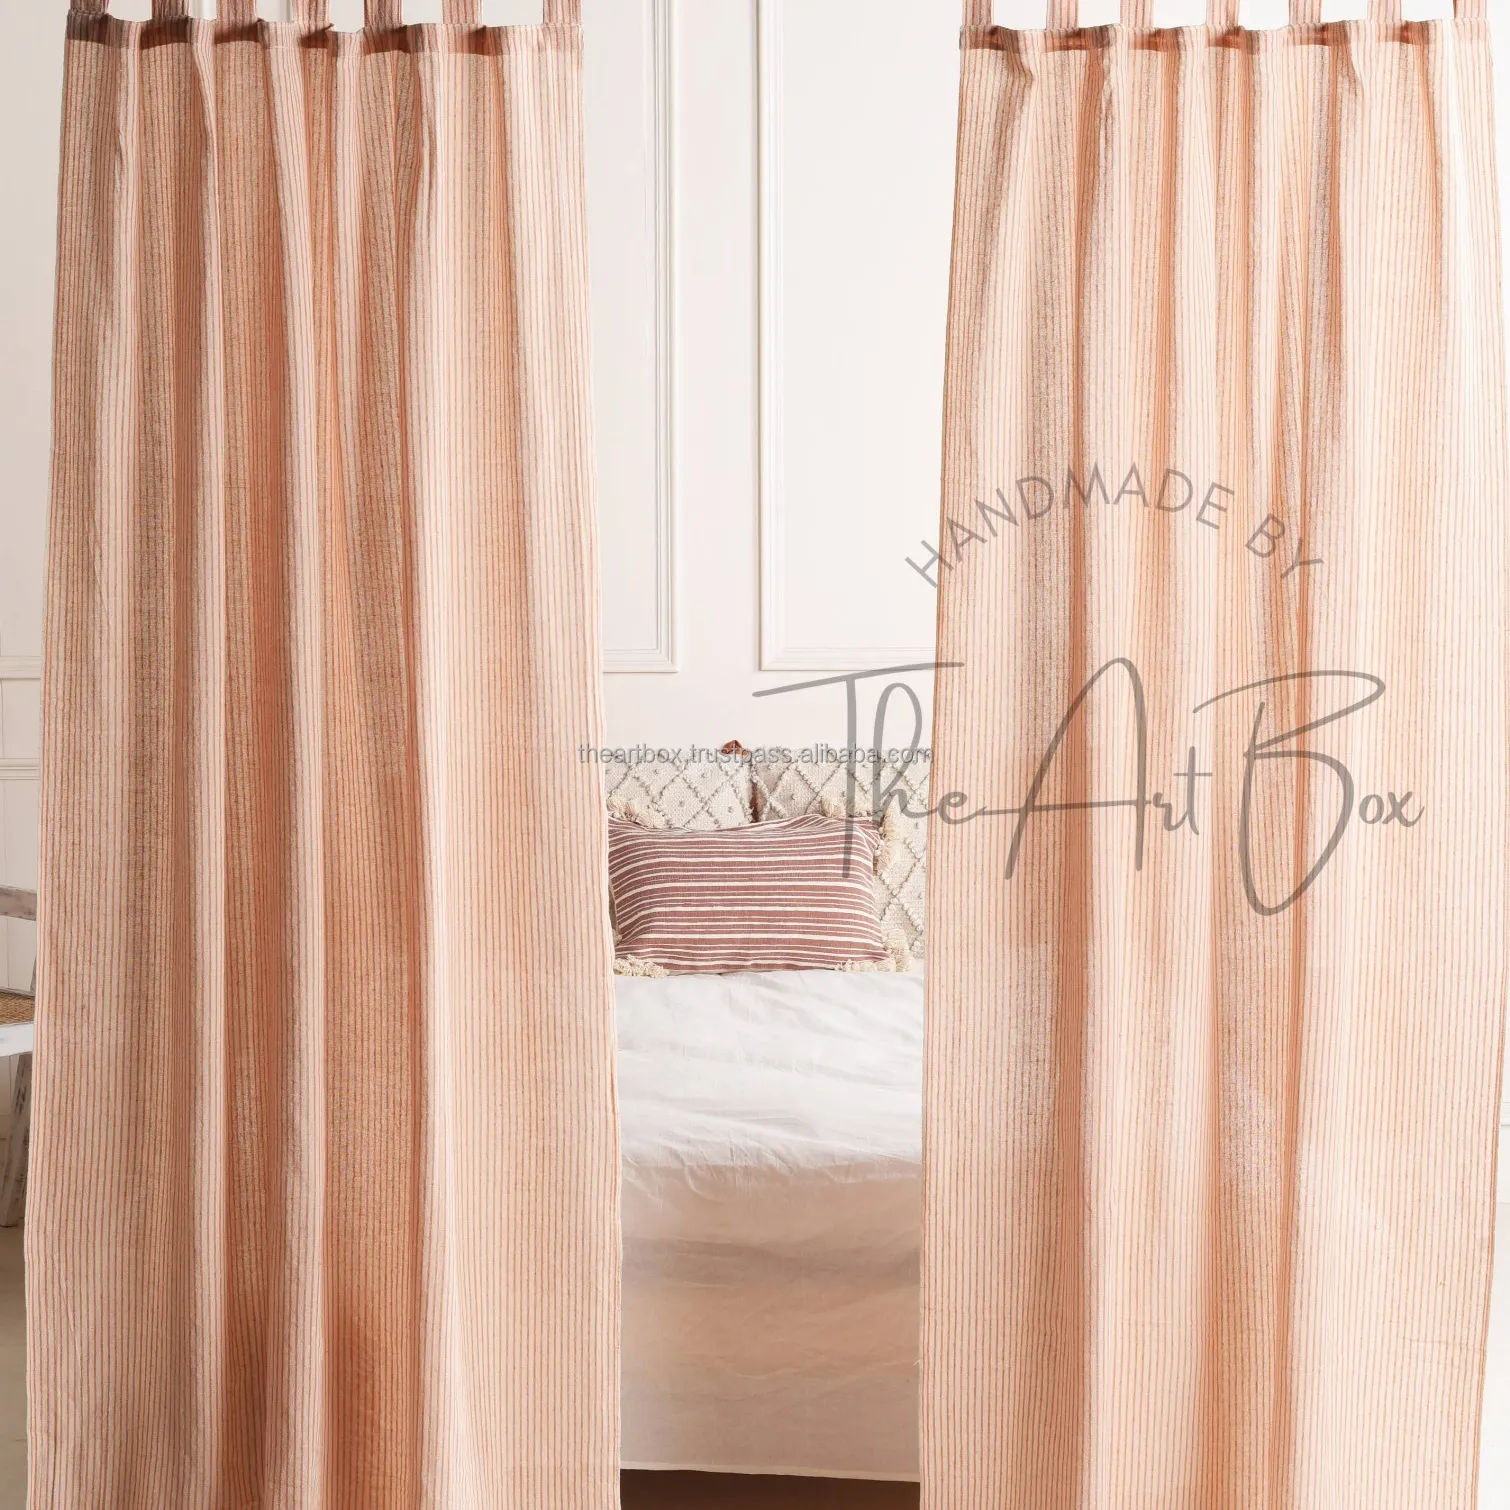 New Arrival Good Look Curtains For The Living Room Linen Gauze Curtain Cotton Fabric Home Decorative Accessories Original Window